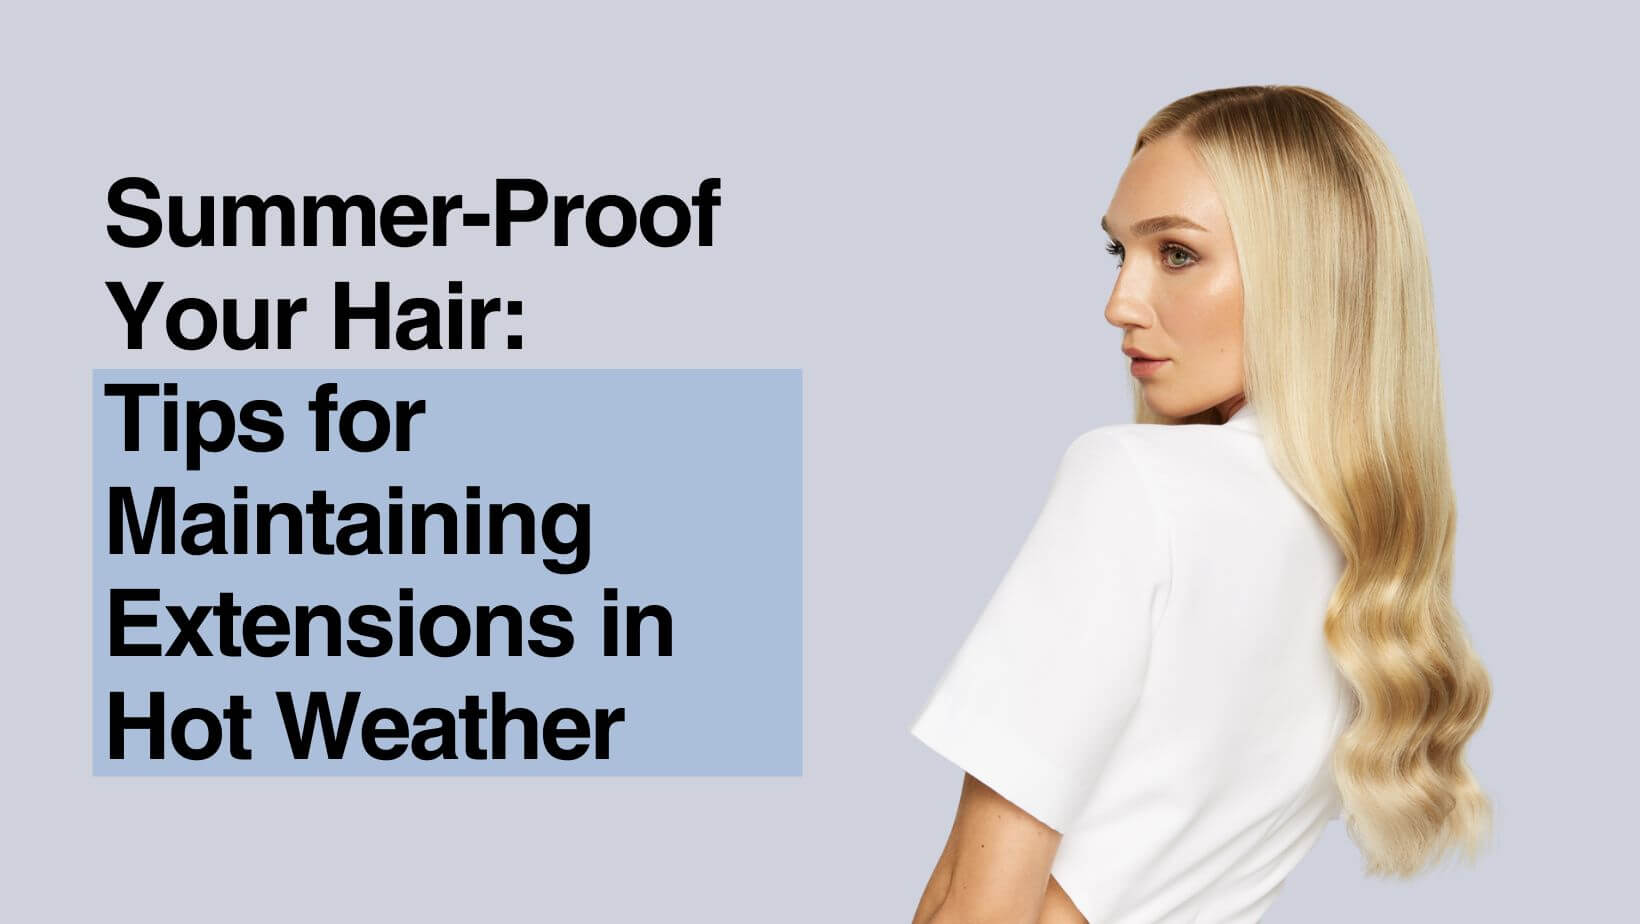 Summer-Proof Your Hair: Tips for Maintaining Extensions in Hot Weather